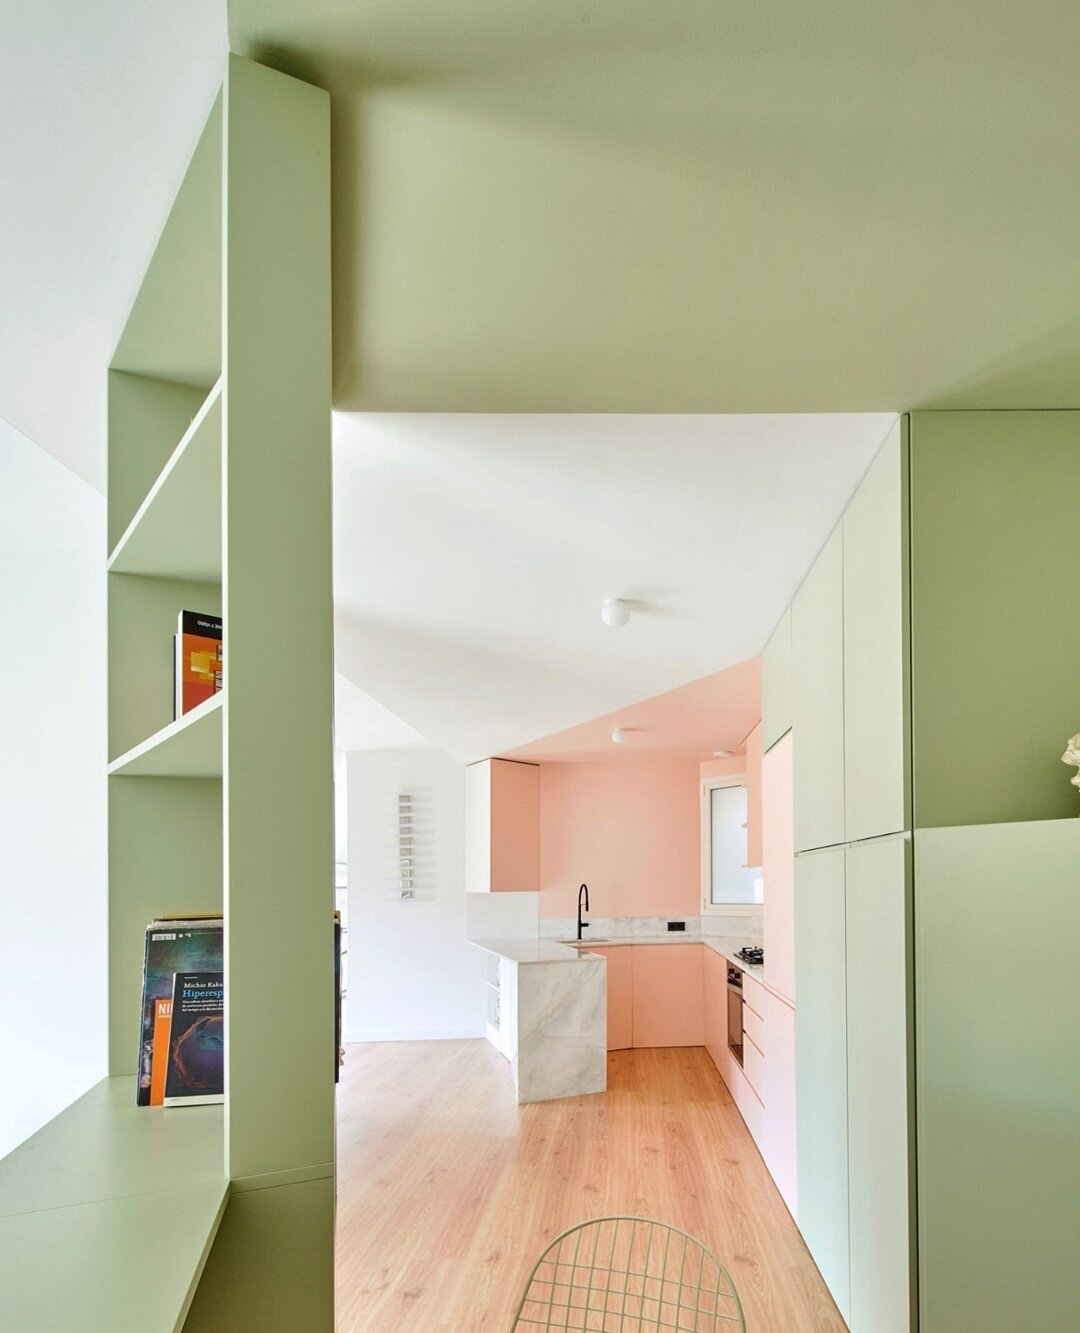 Using colour and joinery to define space|⁠
⁠
Custom made pastel green joinery volumes create a labyrinth of quirky rooms within rooms. ⁠
⁠
Open shelving, seating nooks, sleeping platforms, and desk spaces frame the interior spaces before morphing int